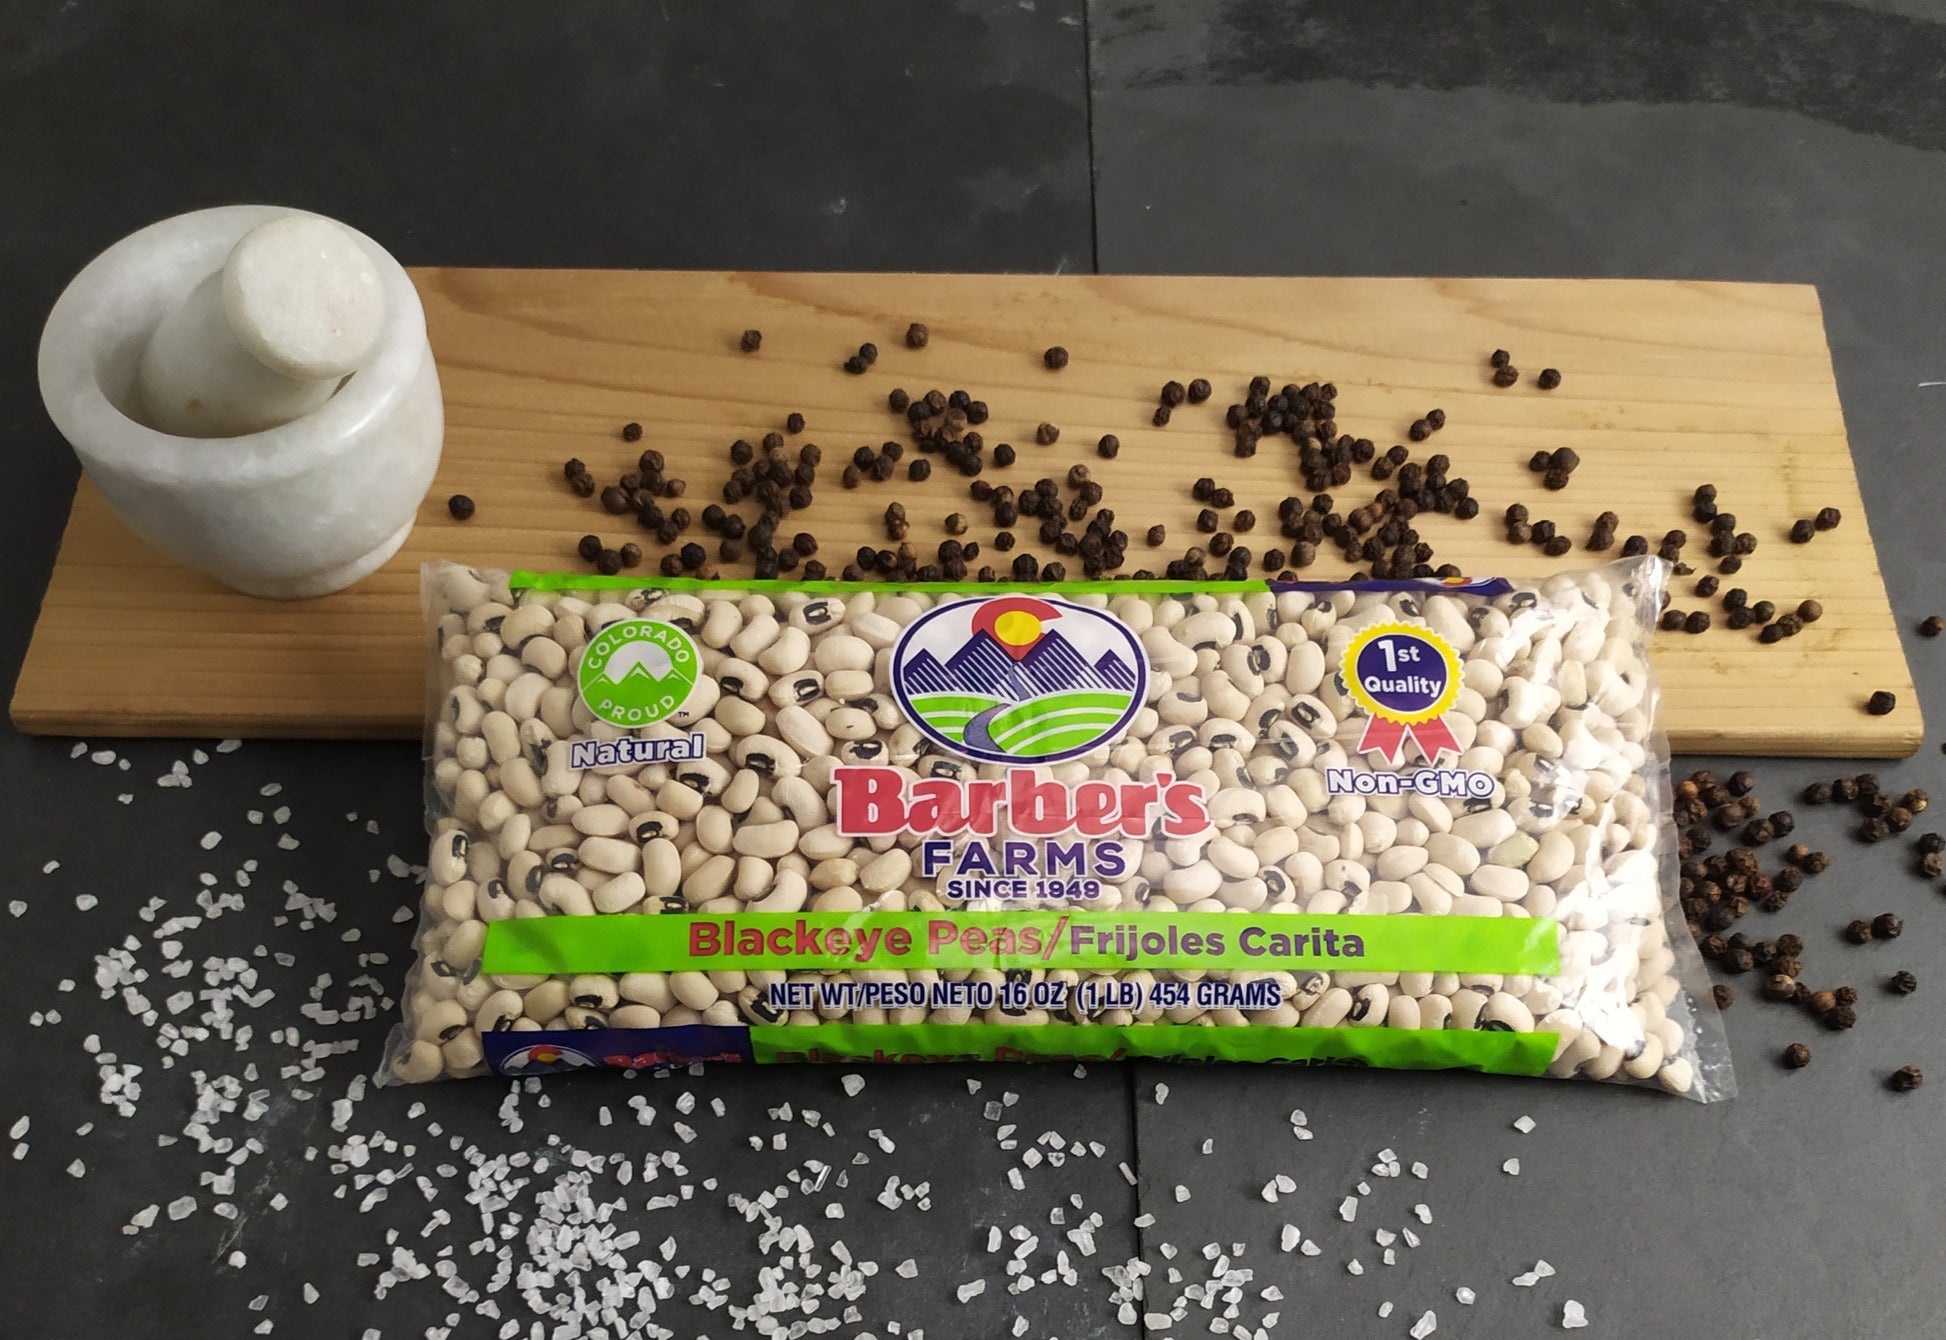 24 pounds Barber's Farms Black Eyed Peas in 1 lb bags